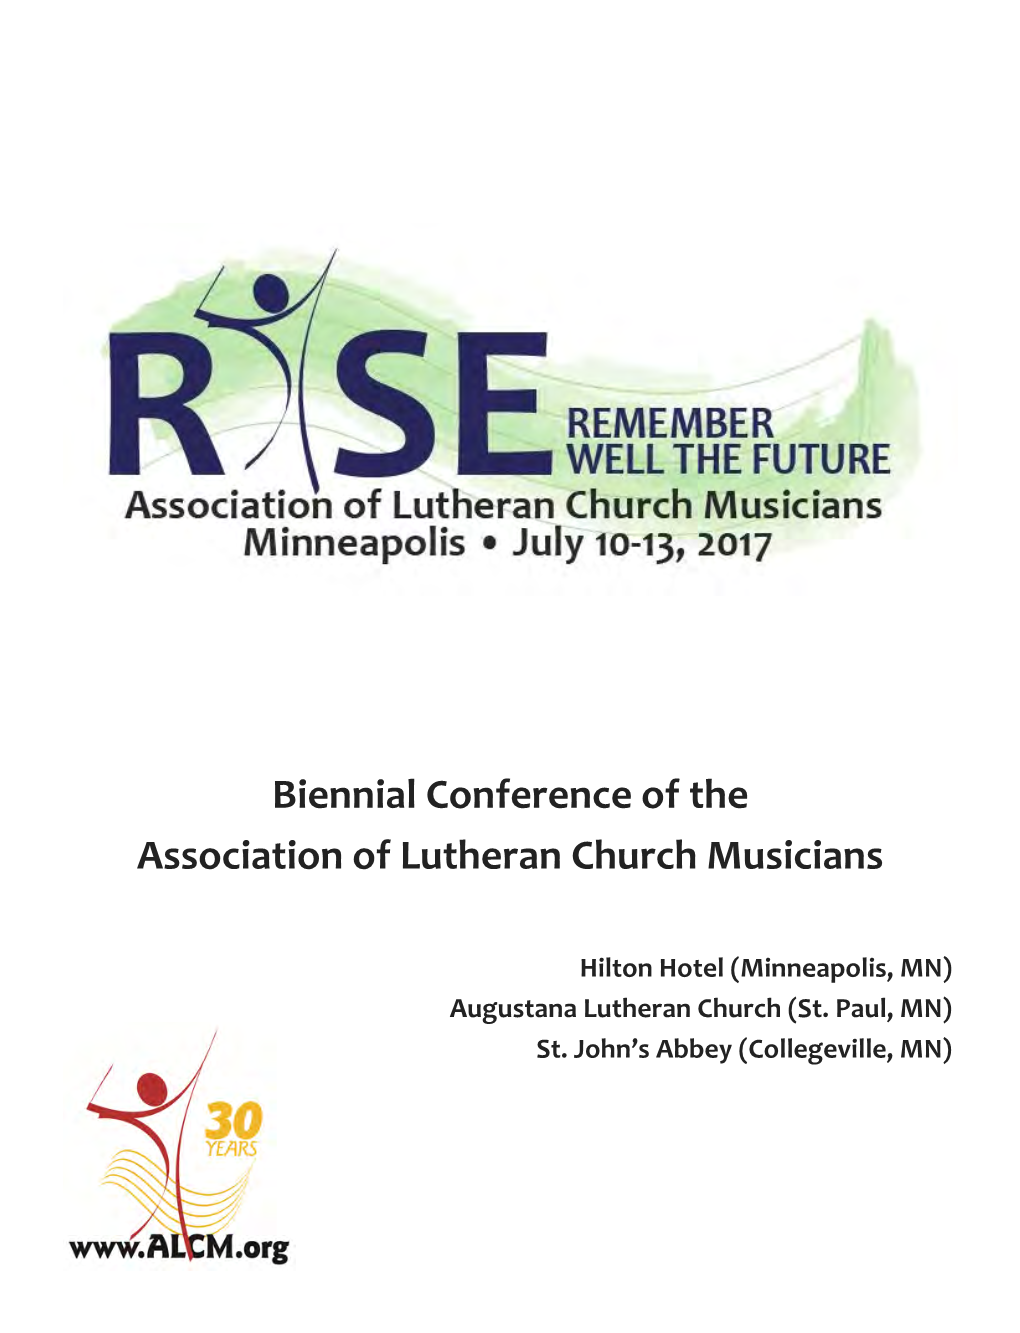 Biennial Conference of the Association of Lutheran Church Musicians